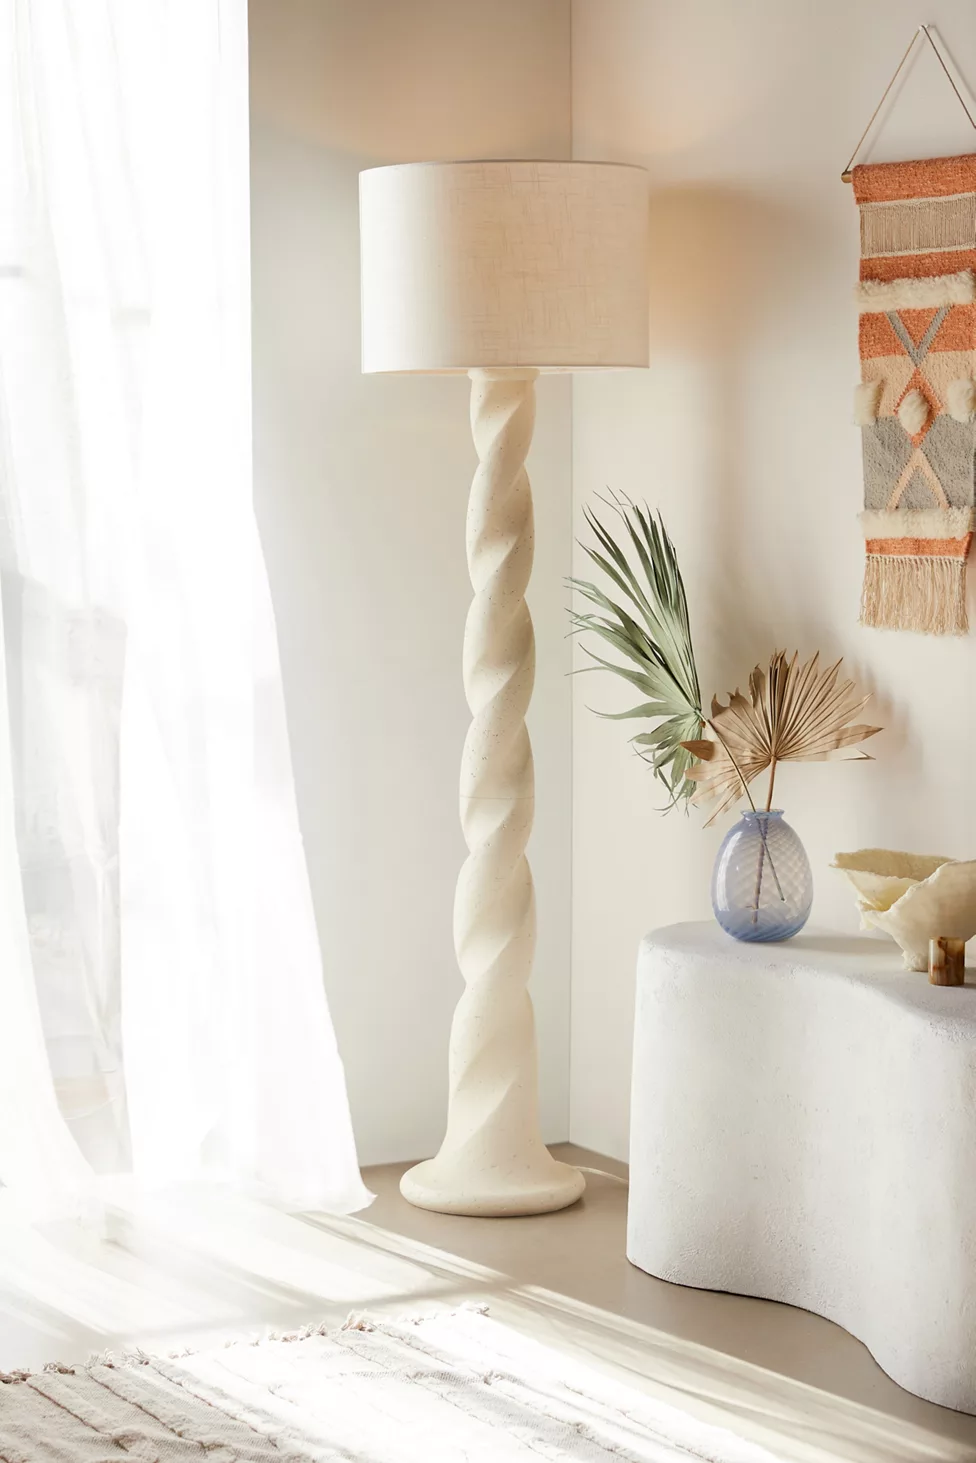 Balance Height with a Tall Floor Lamp